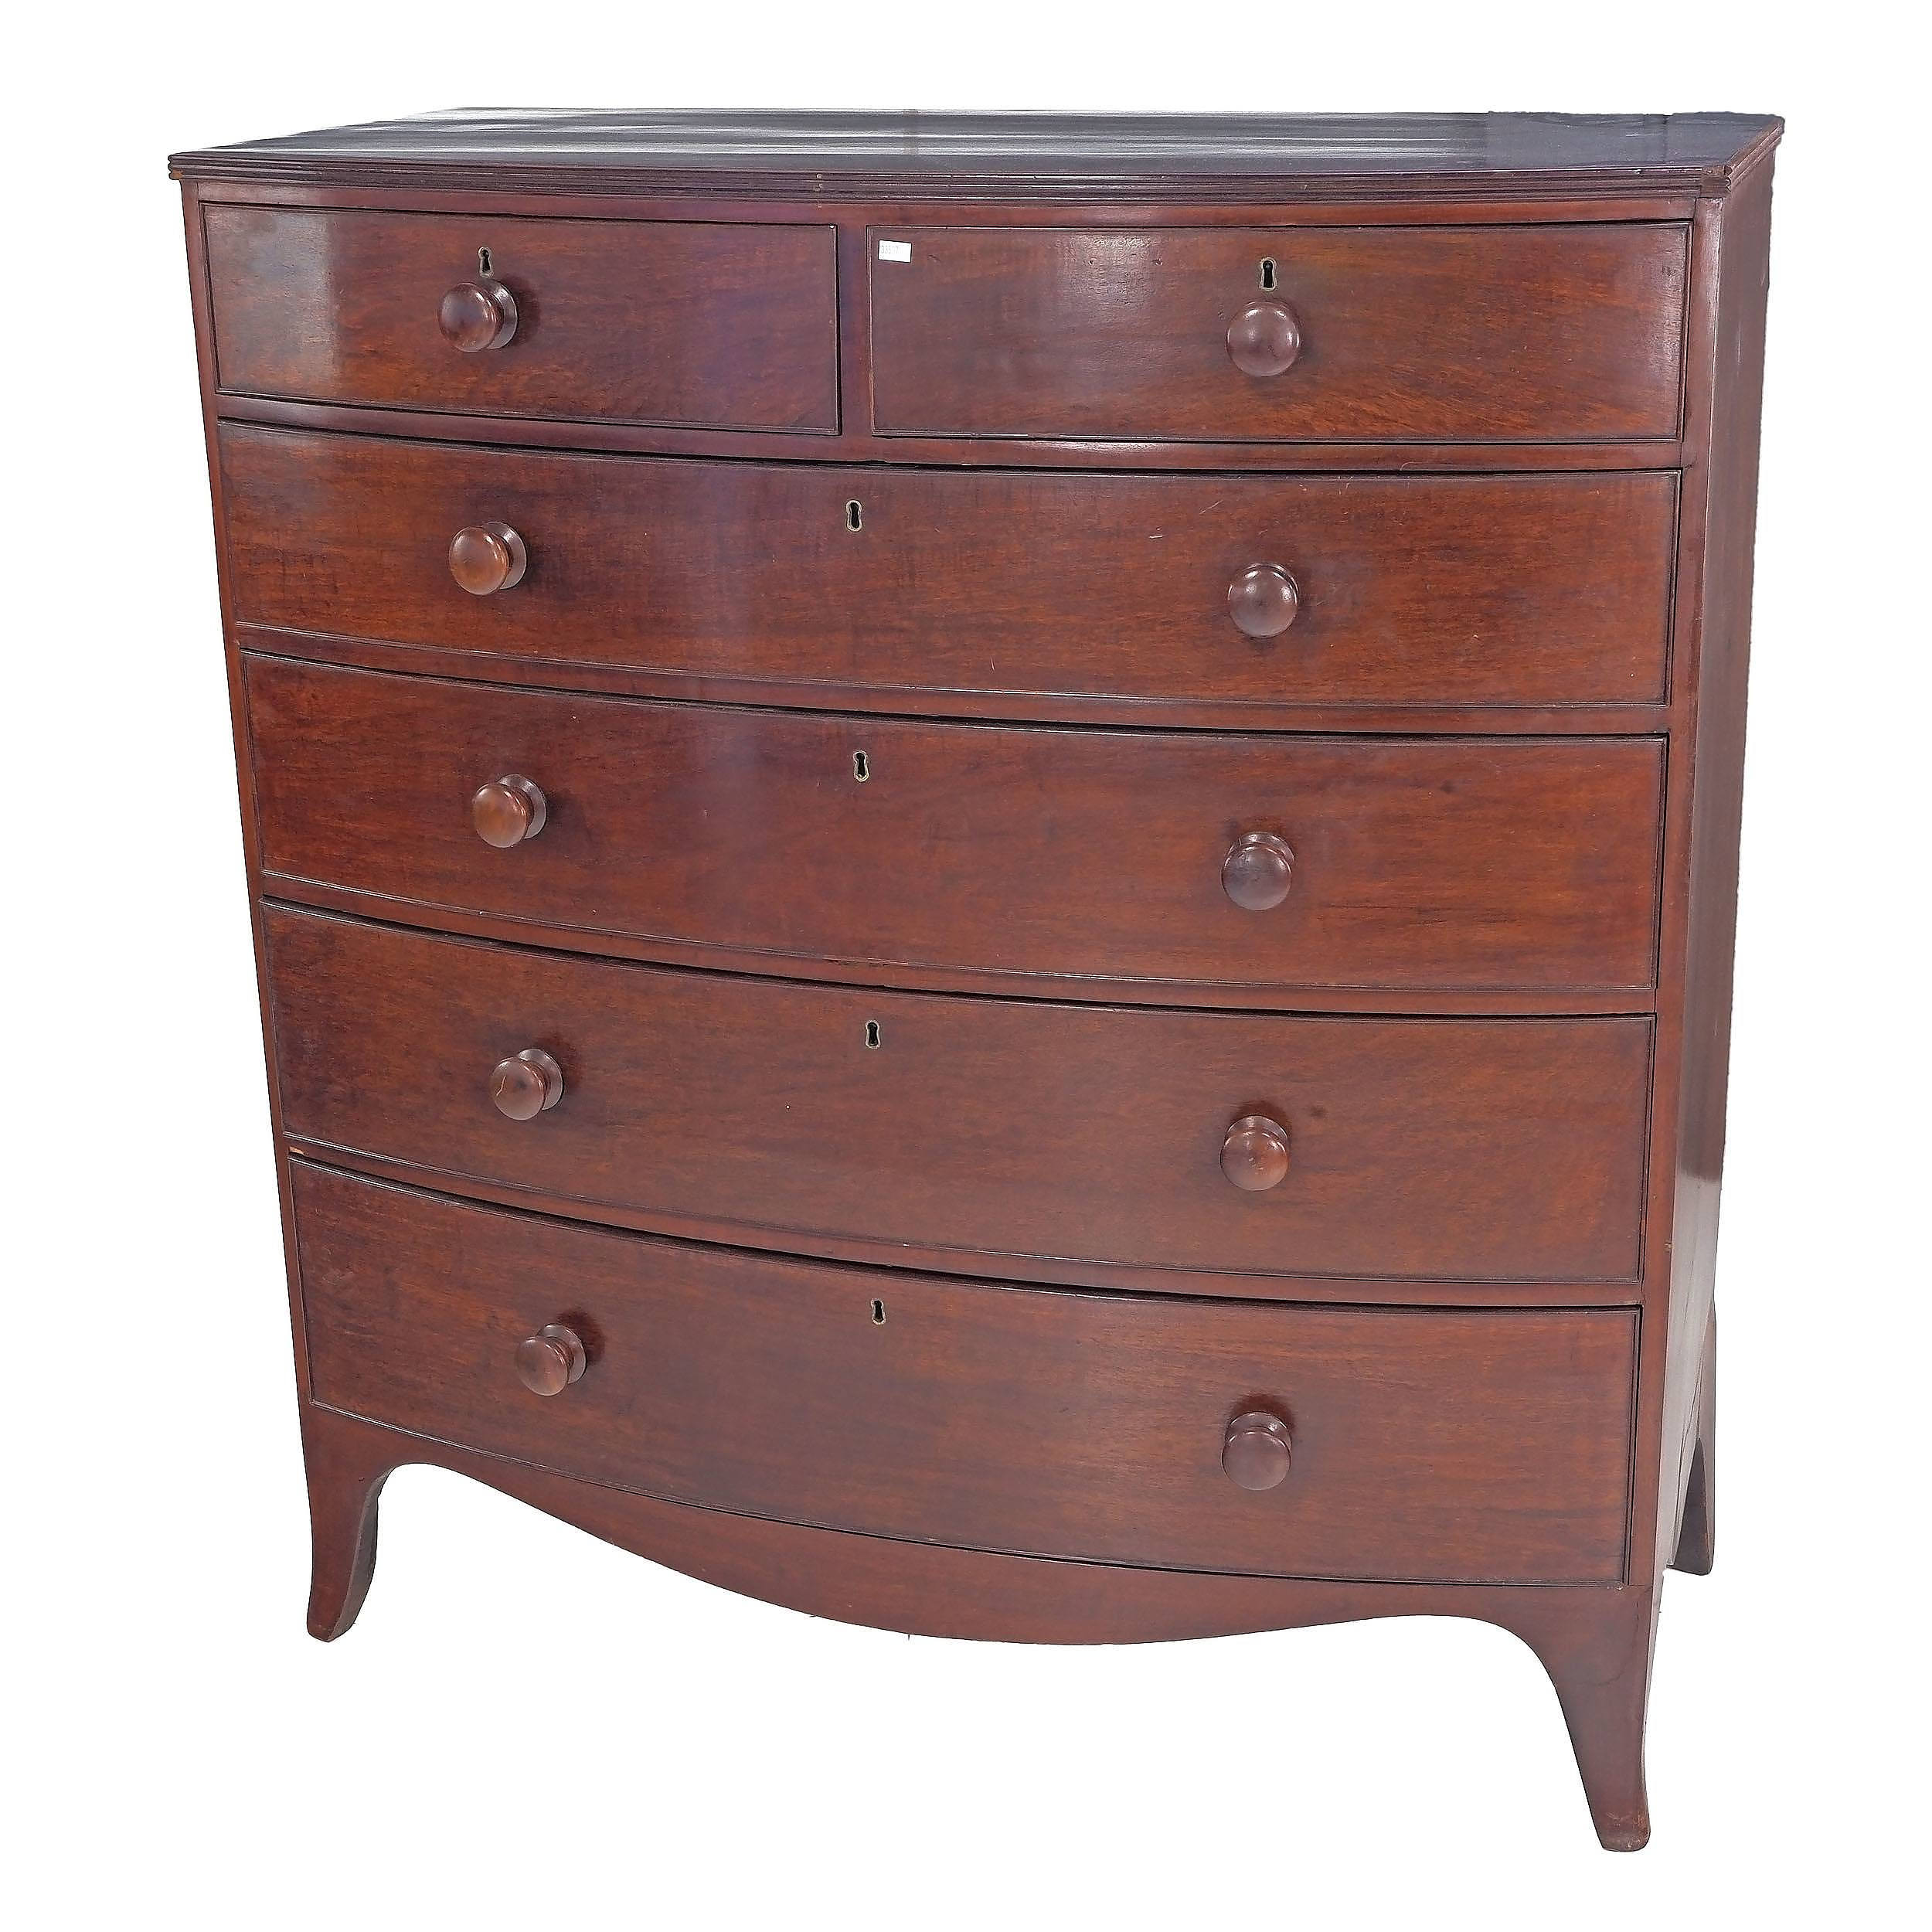 'Regency Mahogany Bowfront Chest of Drawers with Reeded Top on Swept Bracket Feet, Early 19th Century'